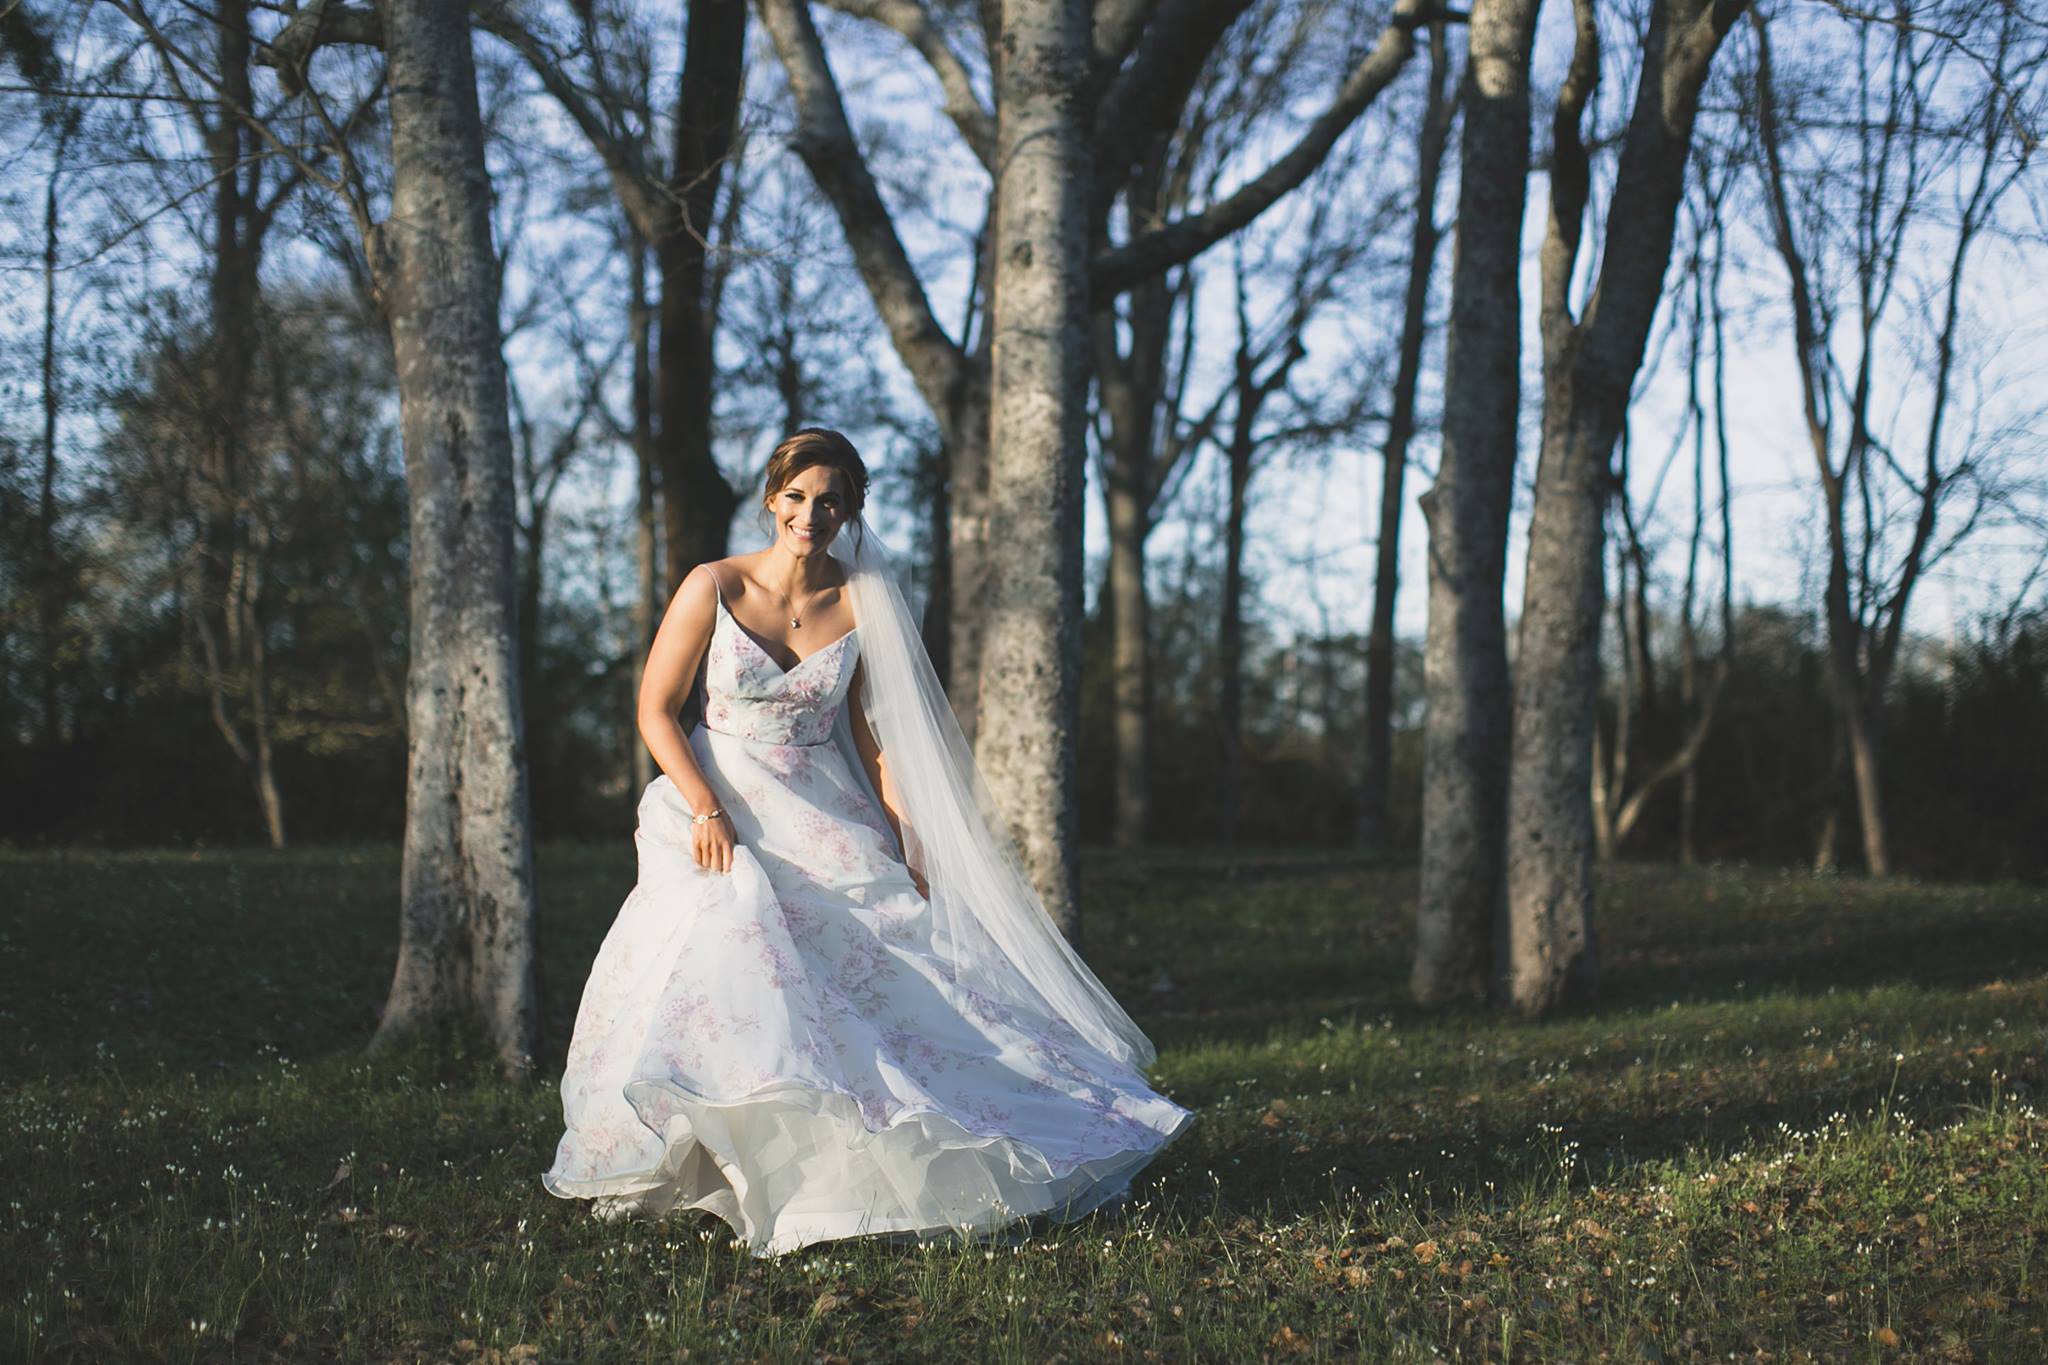 Blue Wedding Dress in Cajun and French-Inspired Bridal Session - Midgley Bride wearing Kira by Sottero and Midgley